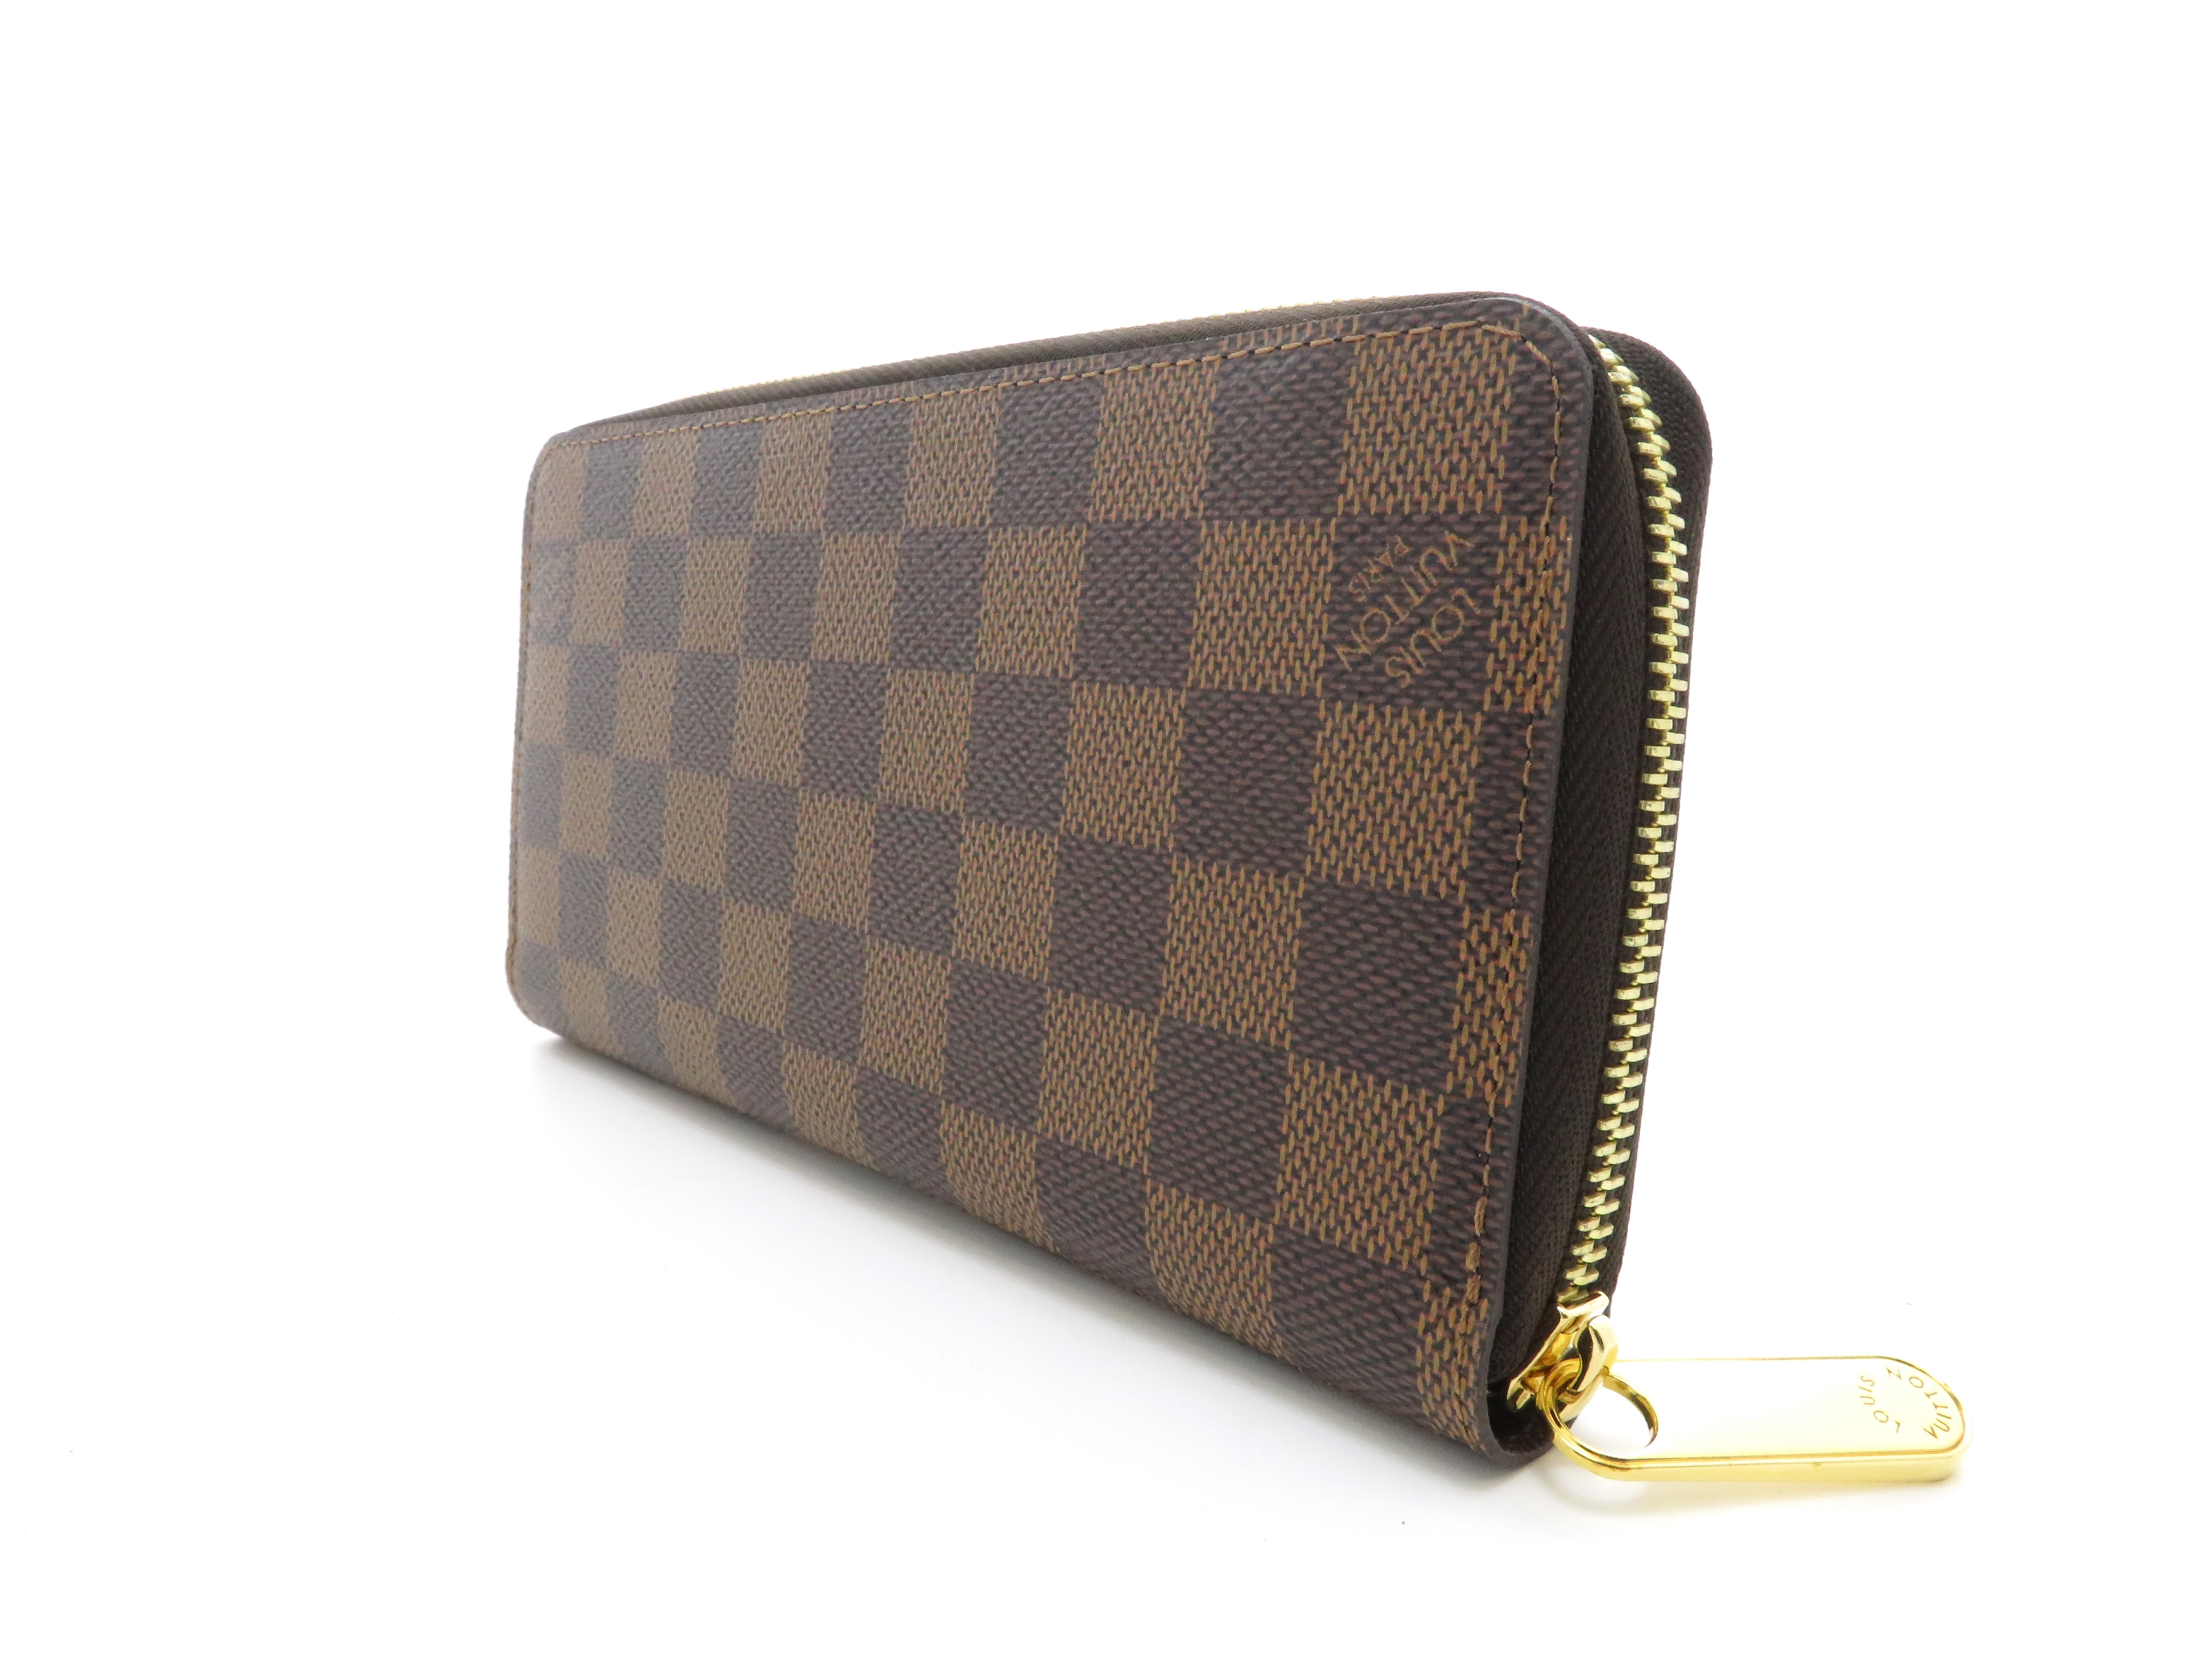 LOUIS VUITTON ルイヴィトン ダミエ ジッピーウォレット N41661 エベヌ 2018年頃製造品 made in Spain